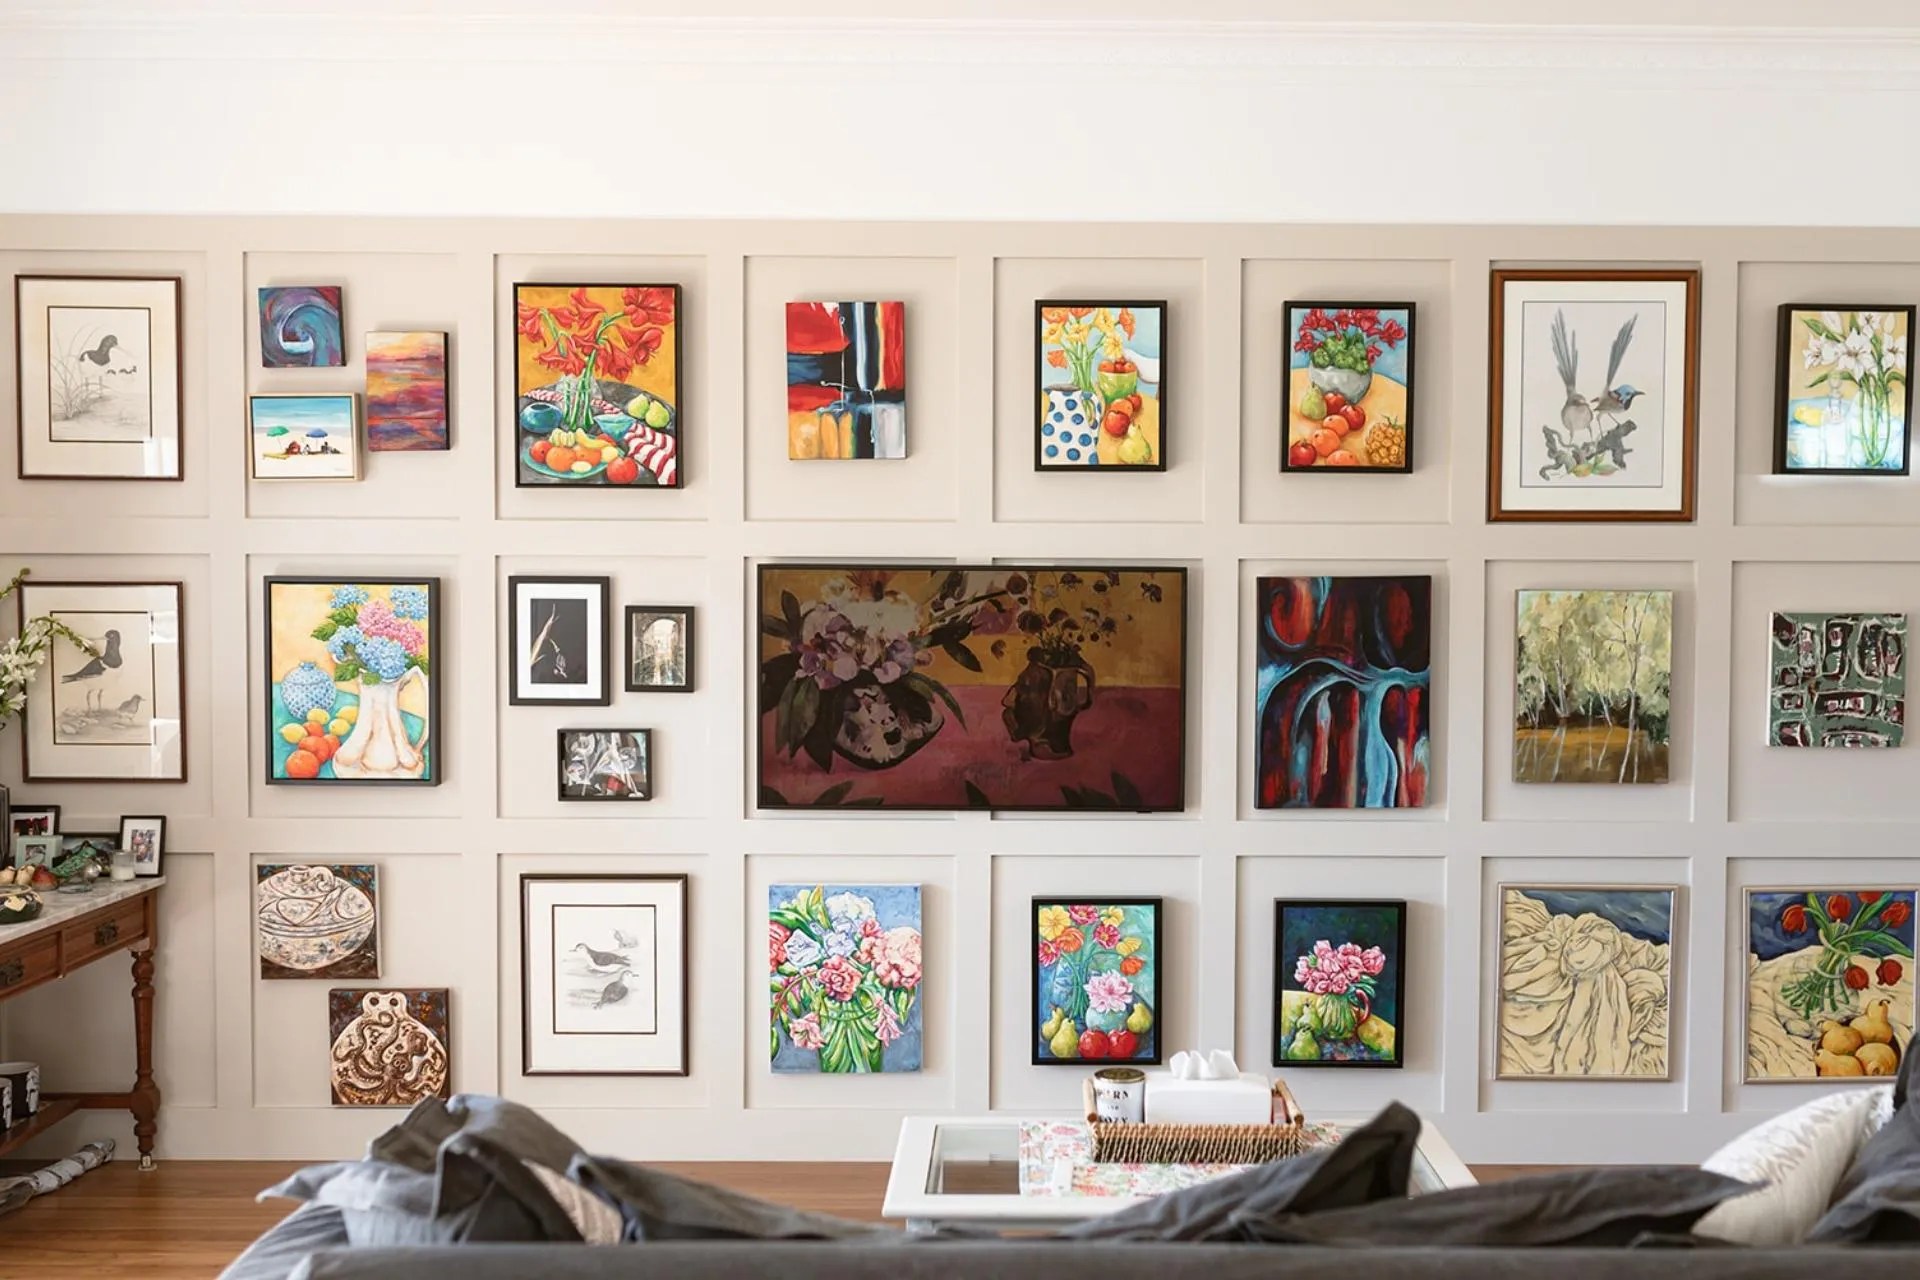 A living room with many framed pictures on the wall.